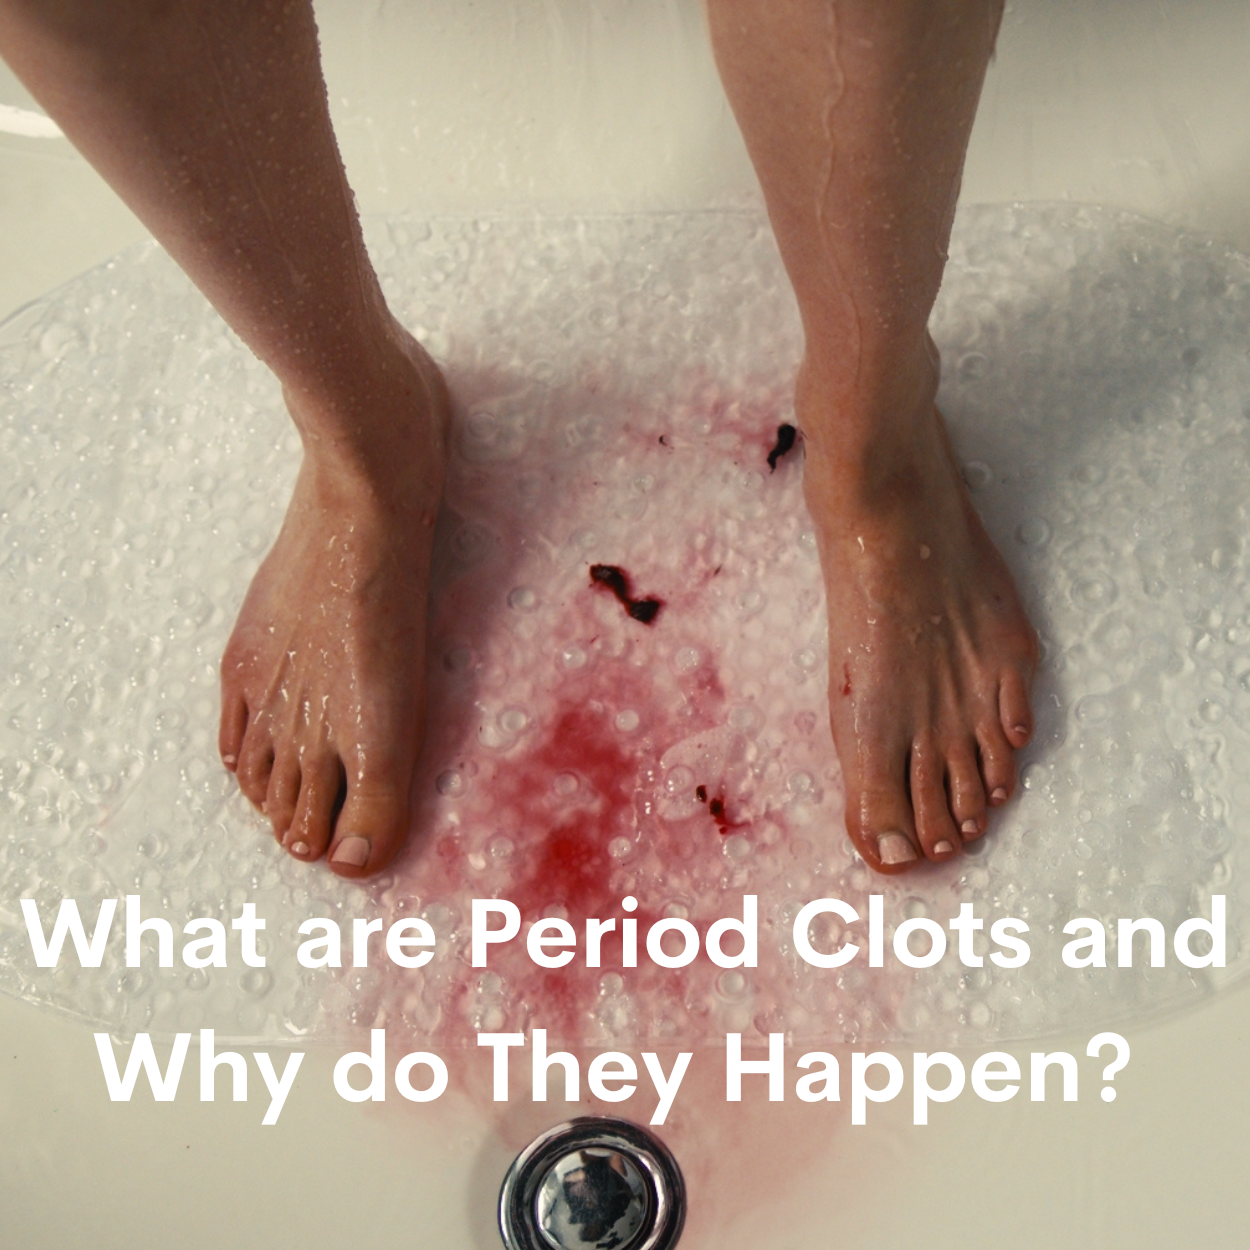 Blood Clots During the Period: Is it Normal?